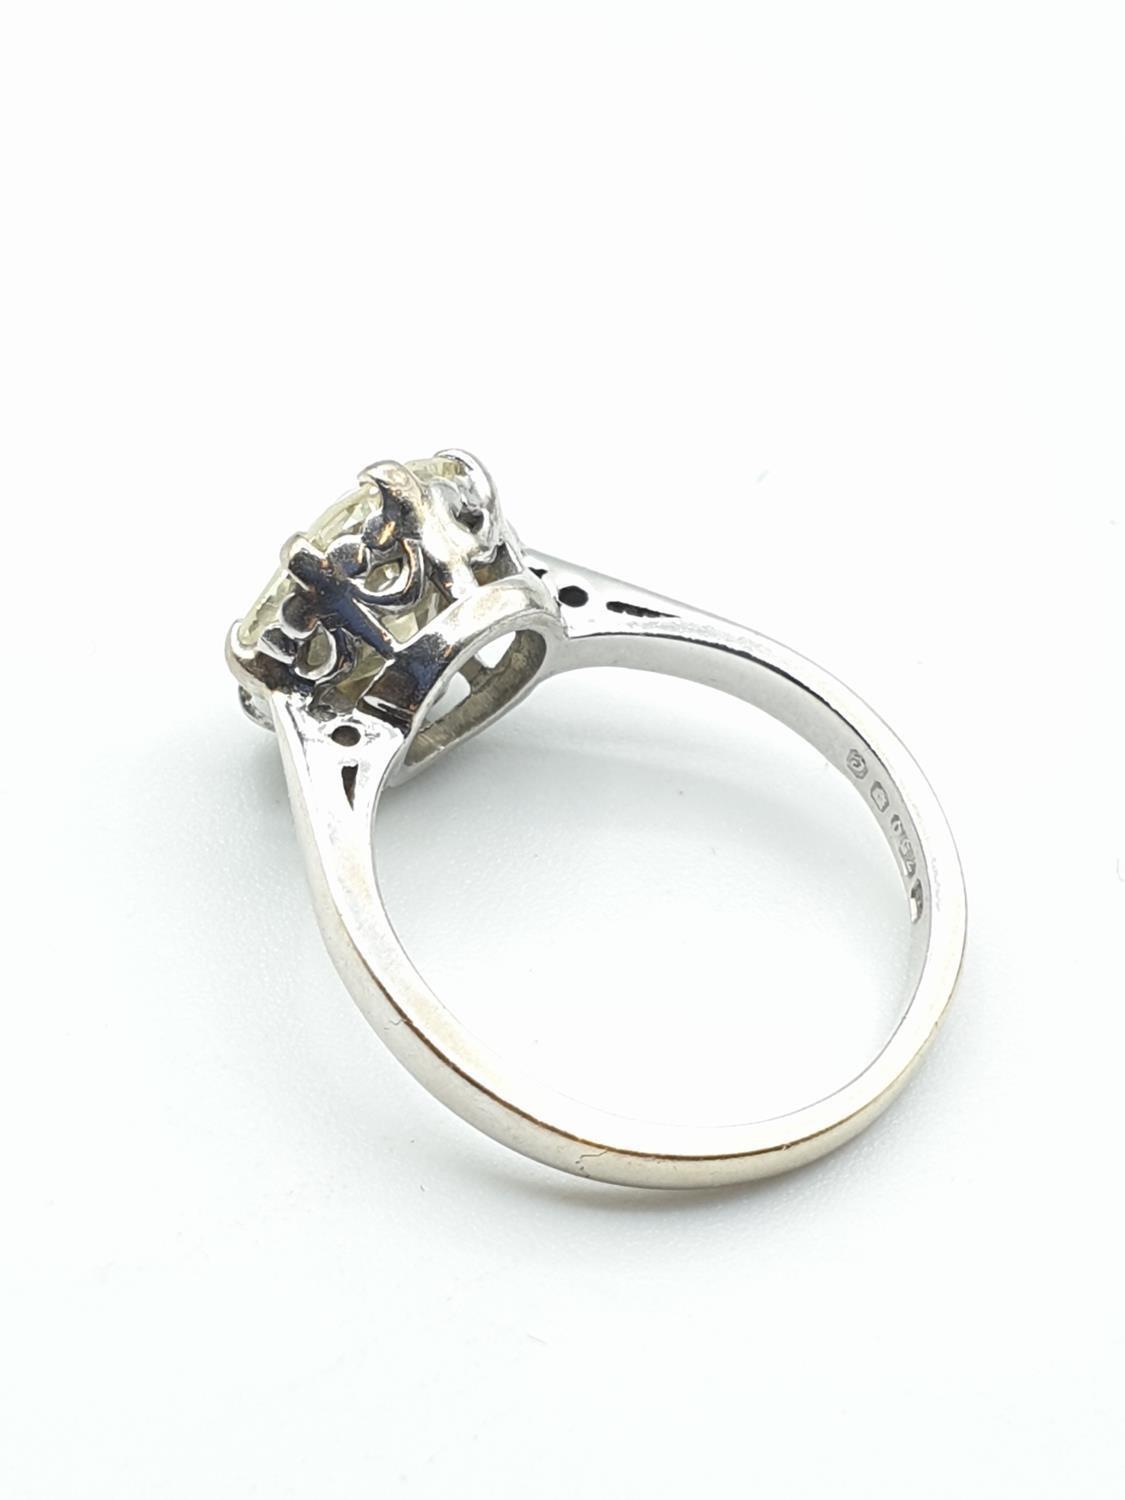 2.2ct diamond old cut solitaire ring set in 18ct white gold, size H weight 3.05g - Image 2 of 5